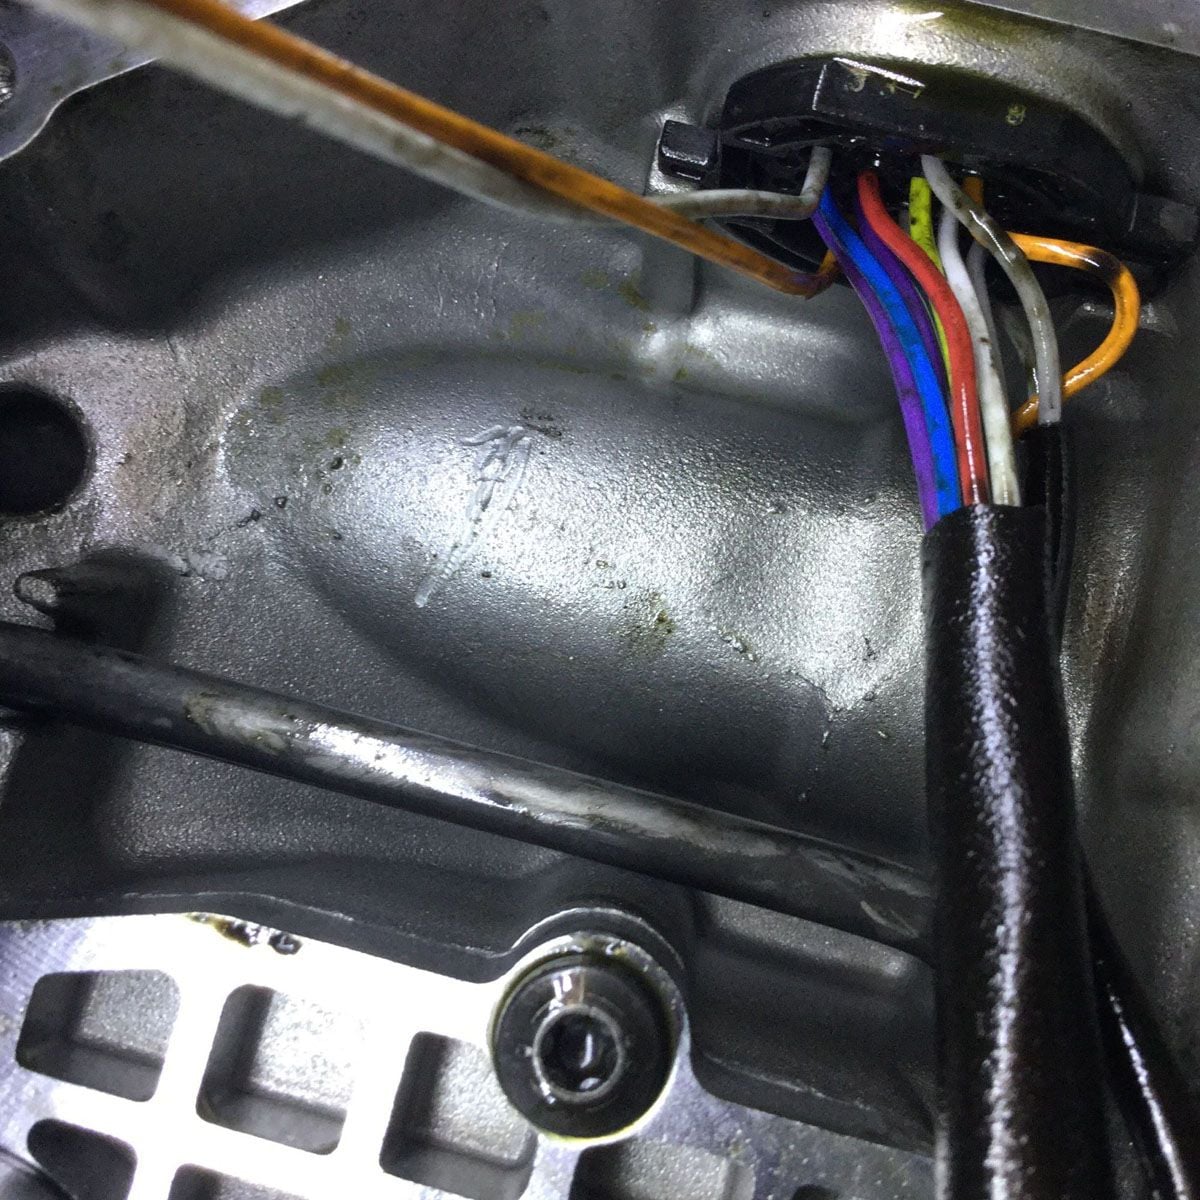 Make sure all wires attached to transmission are in good shape